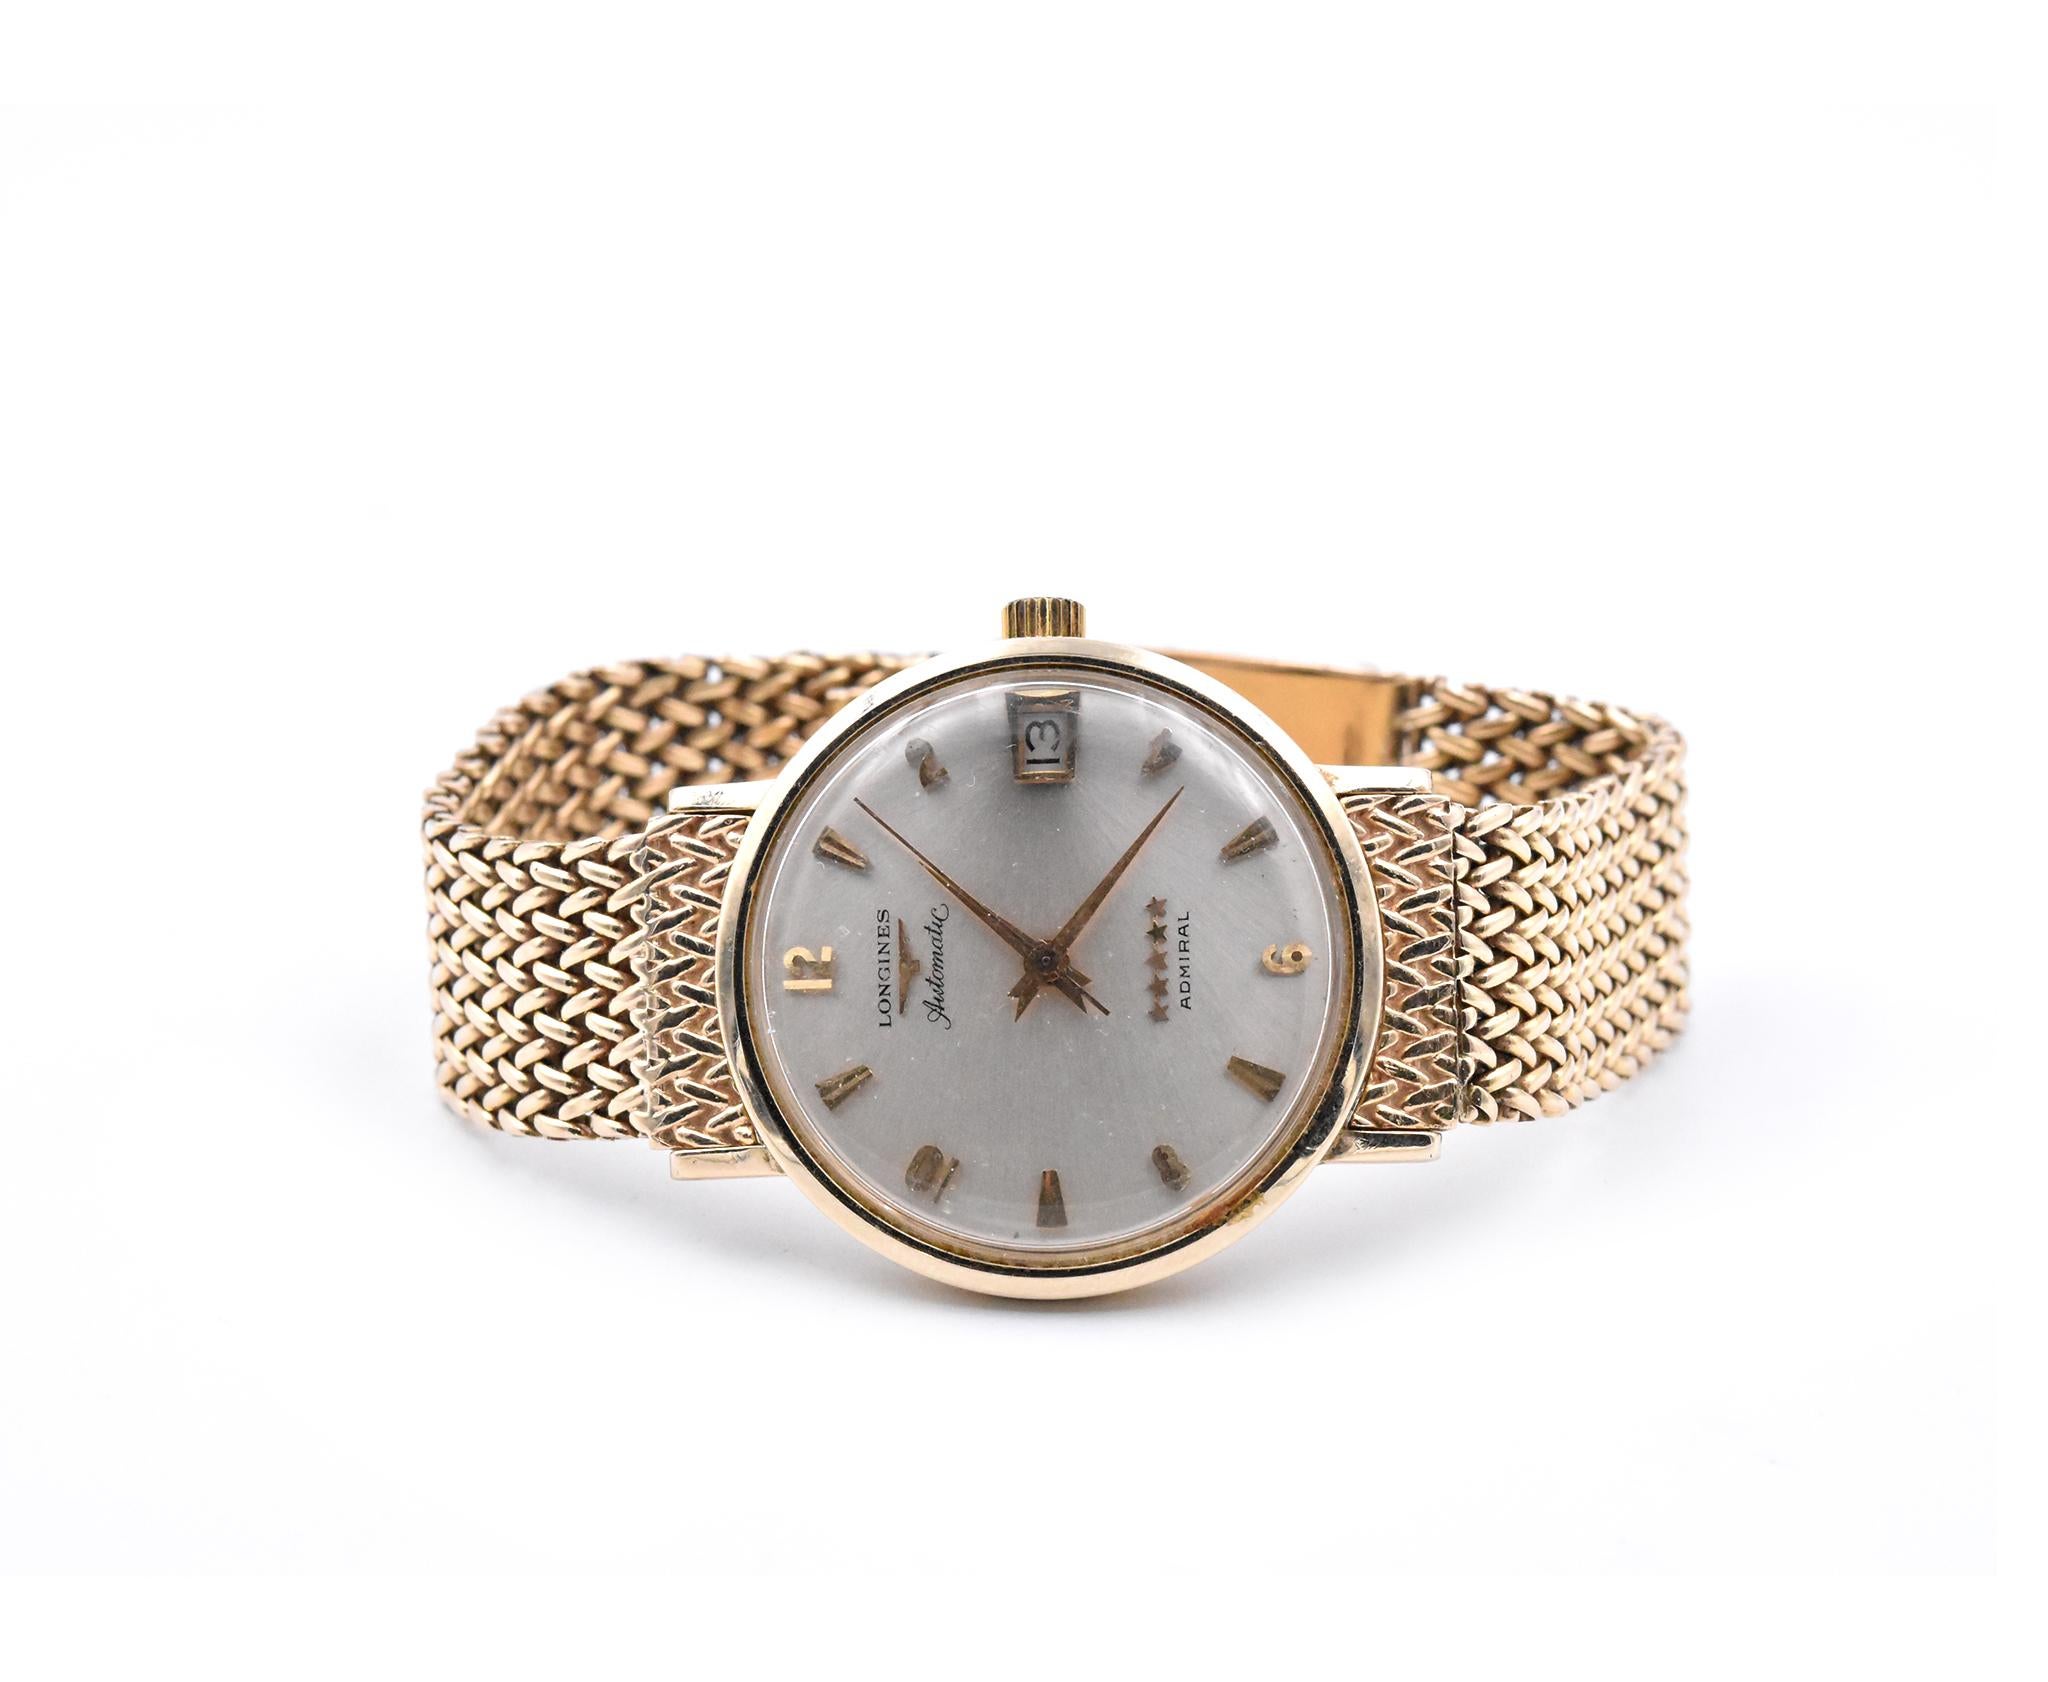 Movement: automatic
Function: hours, minutes, seconds, date
Case: 34.60mm case, smooth bezel, plastic crystal
Dial: silver dial with gold hour markers, gold hands
Band: 14k yellow gold bracelet with a double fold-over clasp, will fit up to a 7